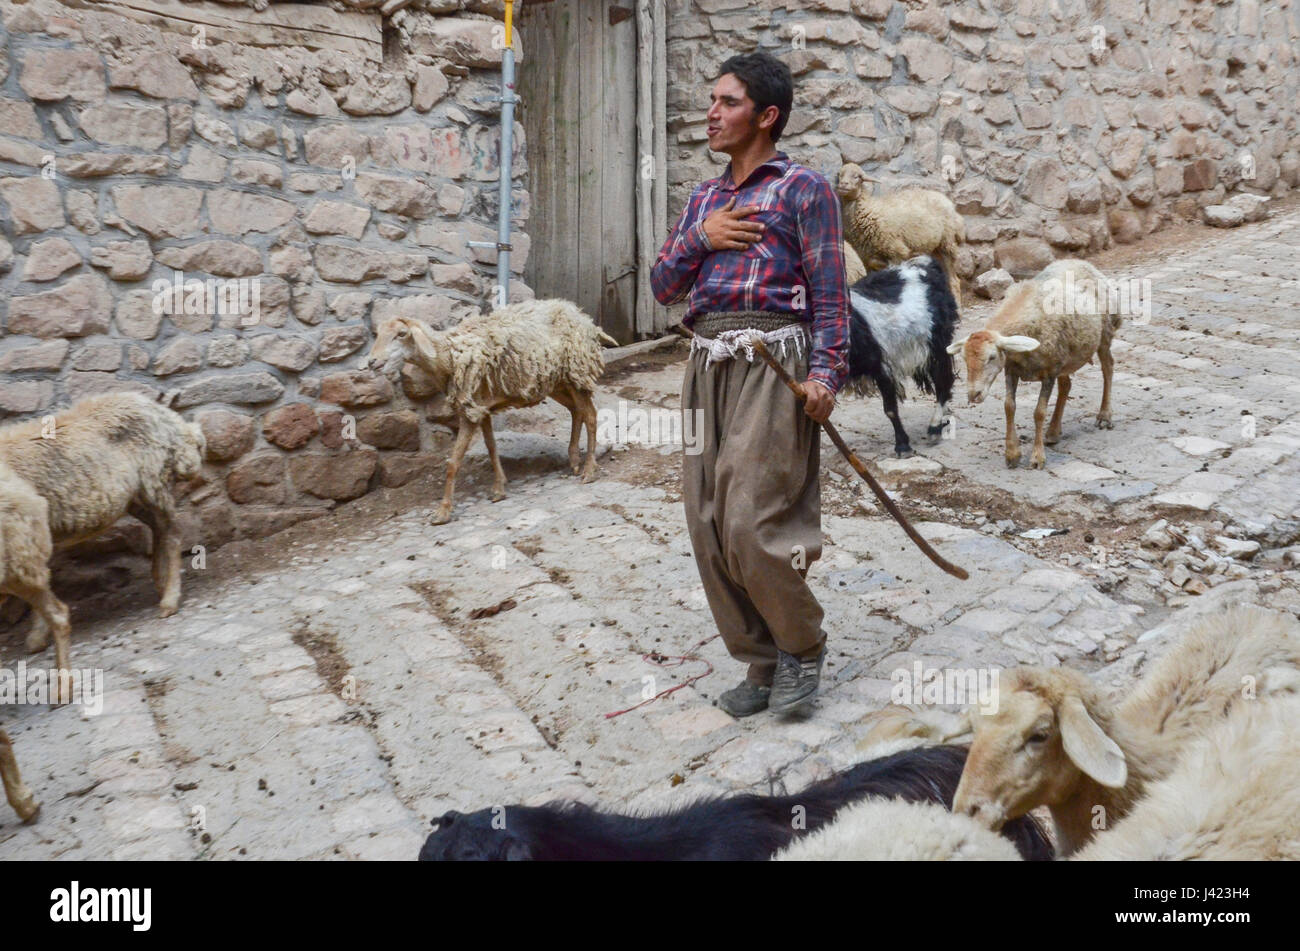 Shepherd With His Sheep In The Streets Of Esfidan, A Traditional Rural Village, North Khorasan Province, IRAN Stock Photo